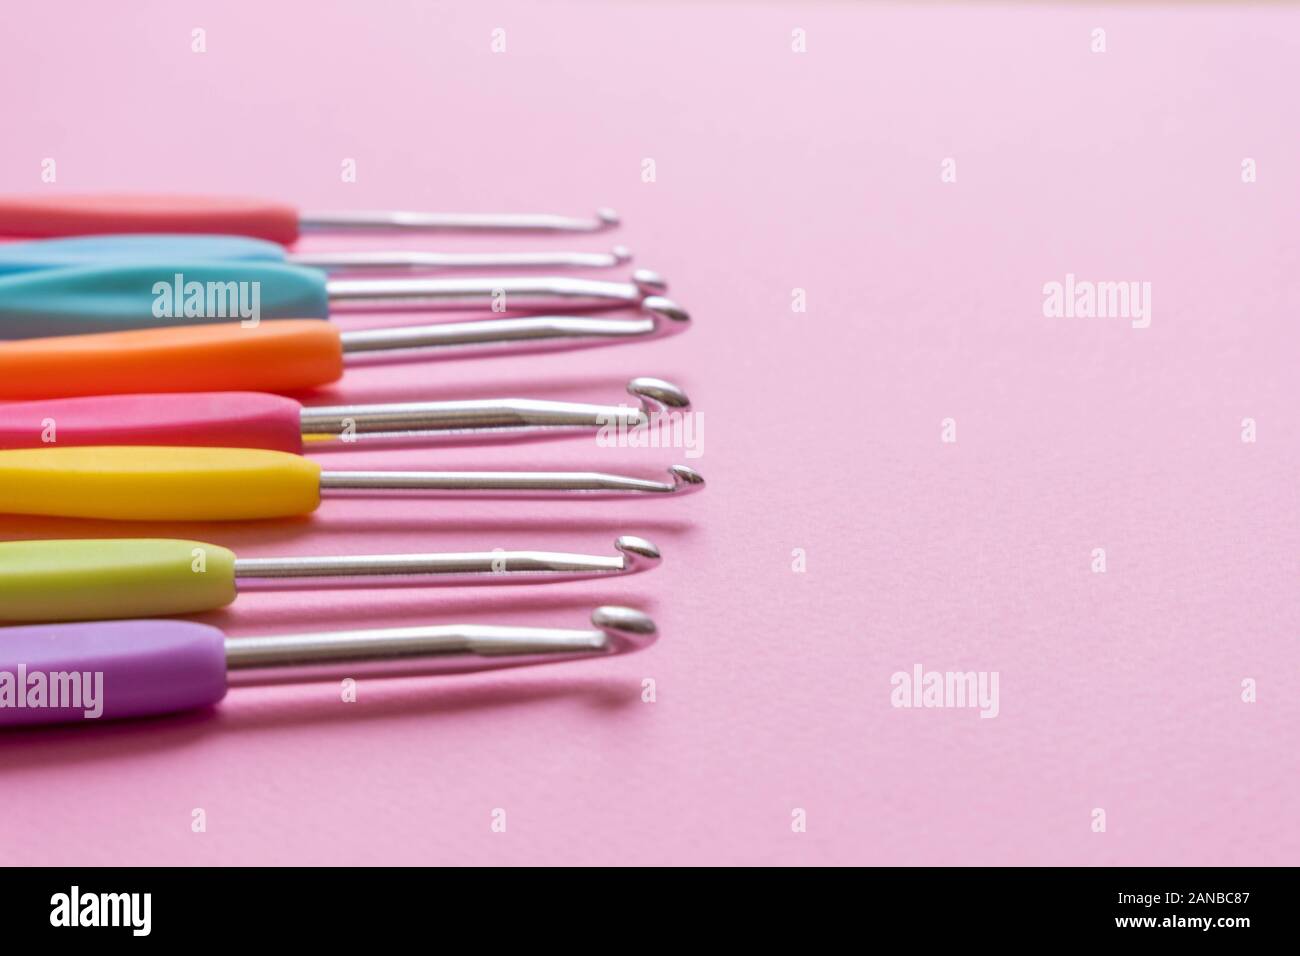 Closeup image of different size colorful crochet hooks on soft pink background Stock Photo